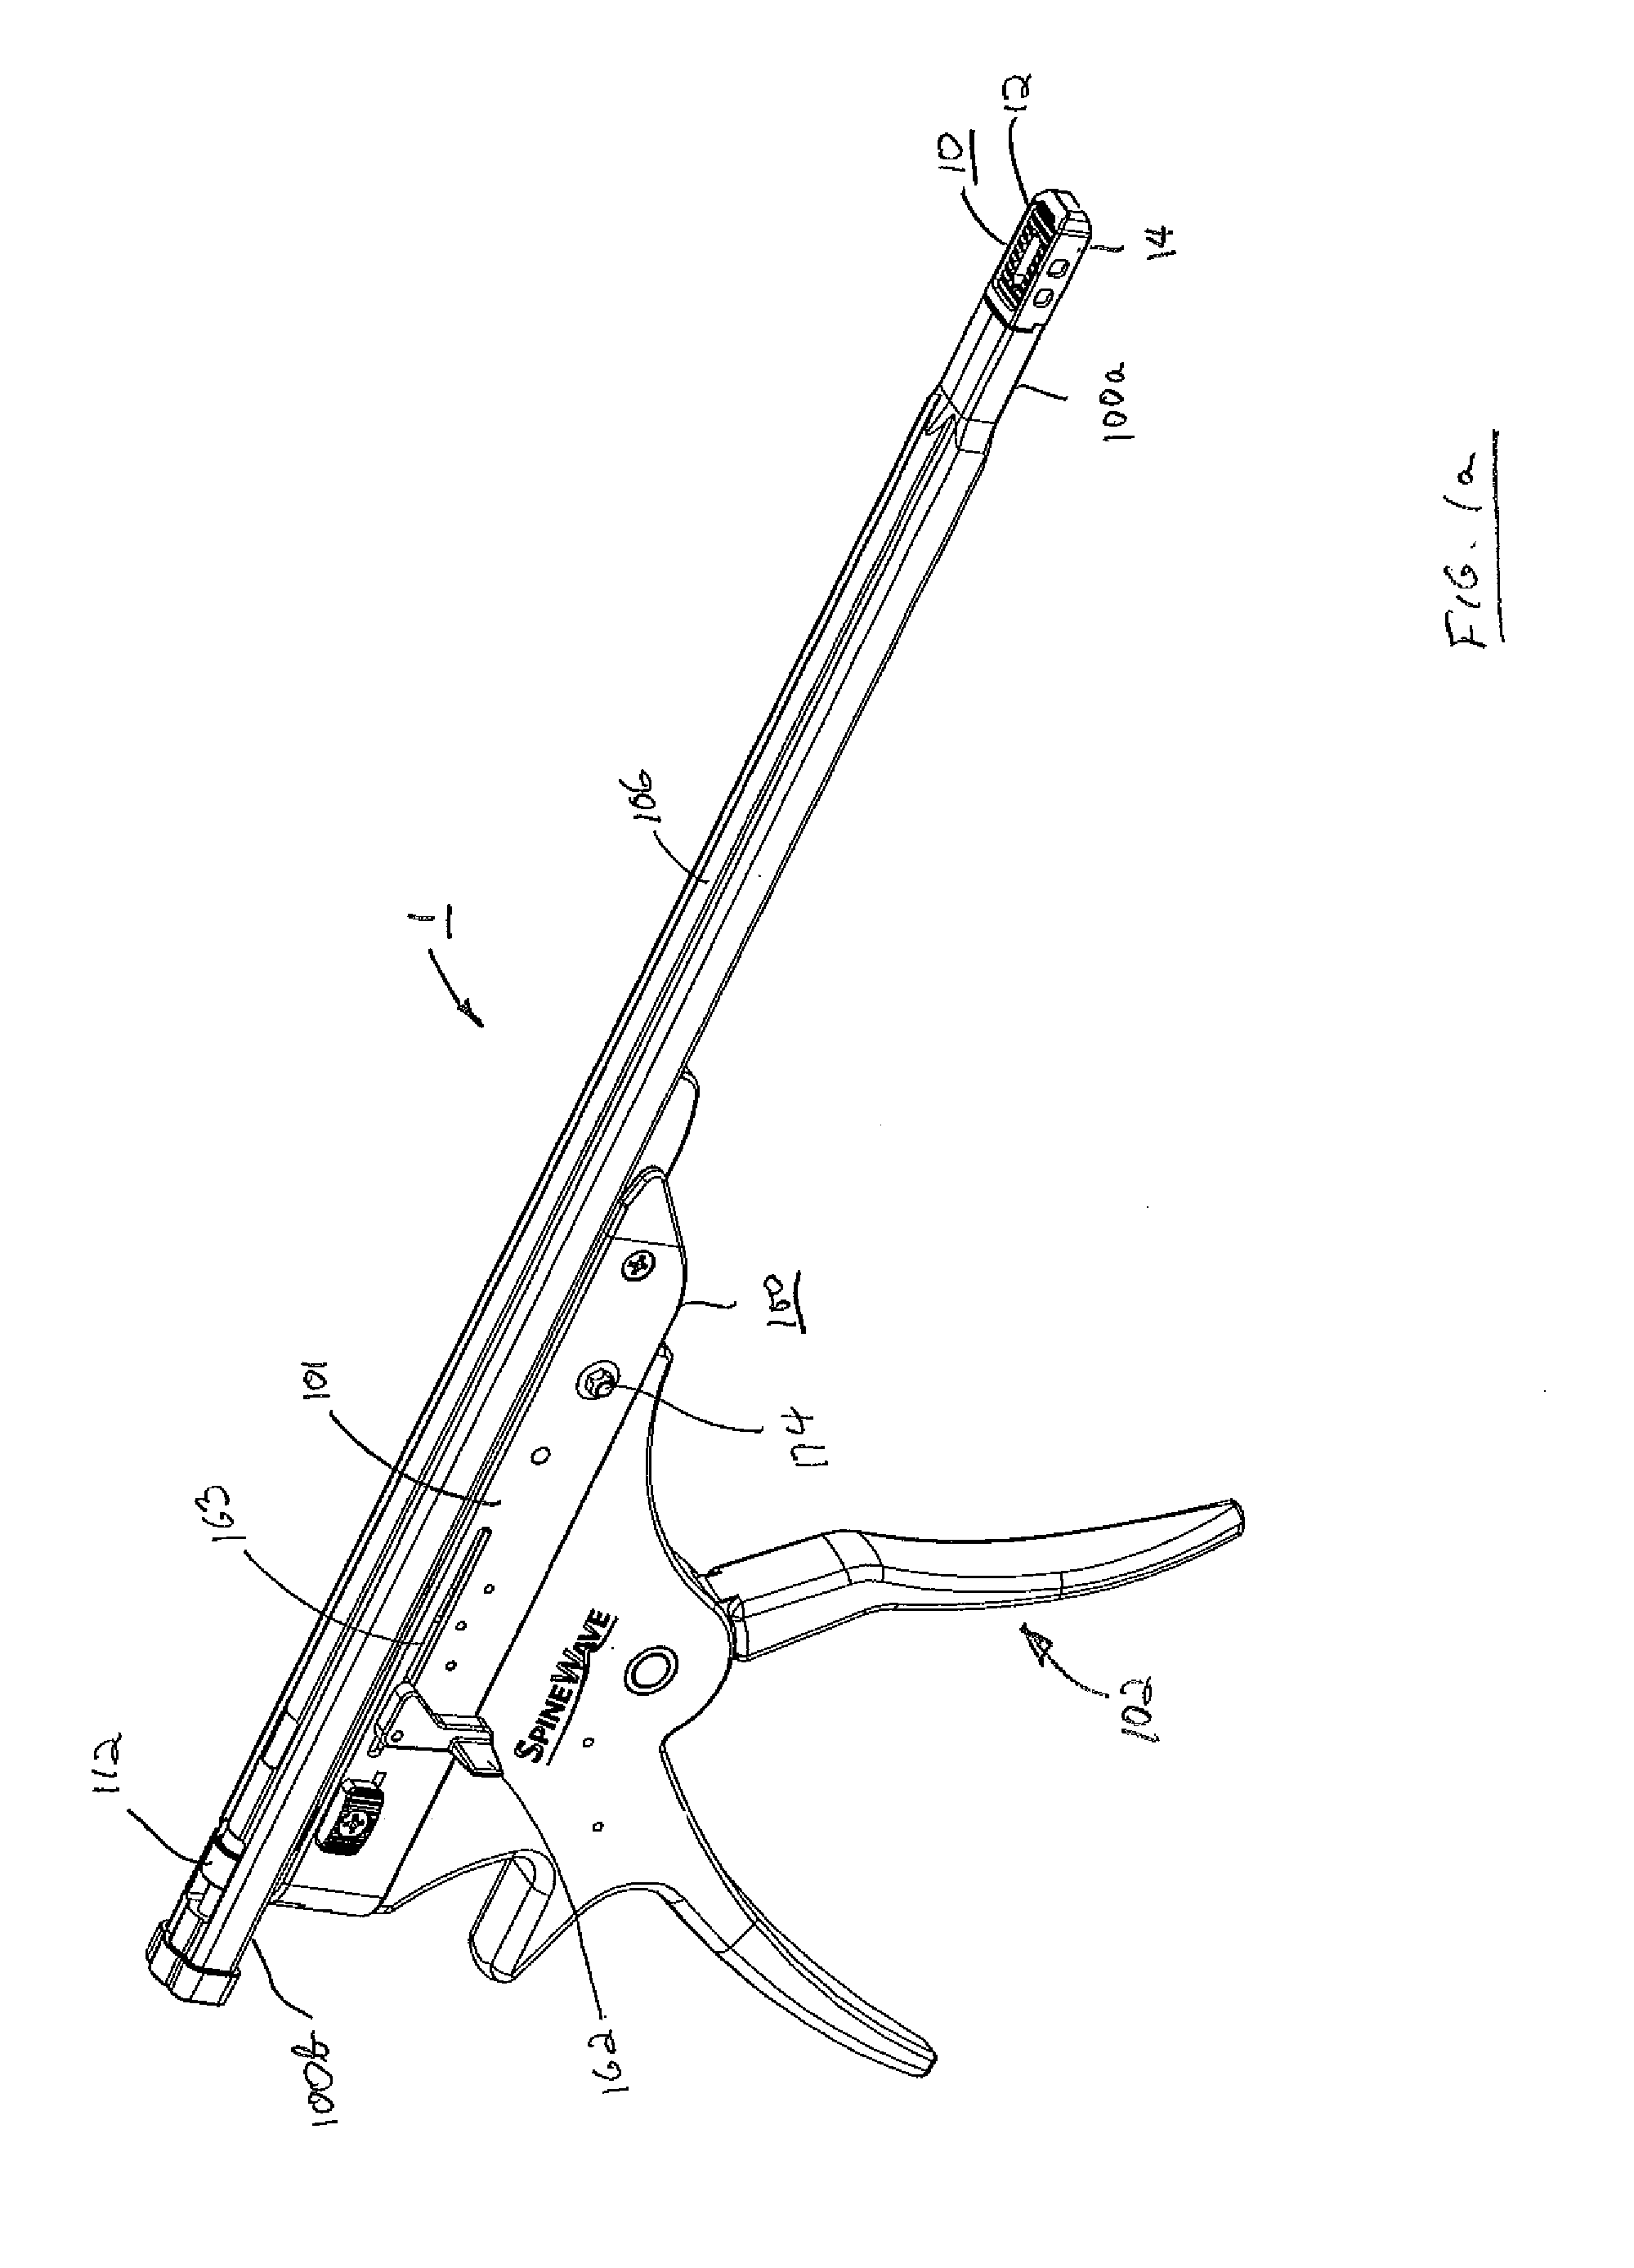 Expandable spinal interbody fusion device